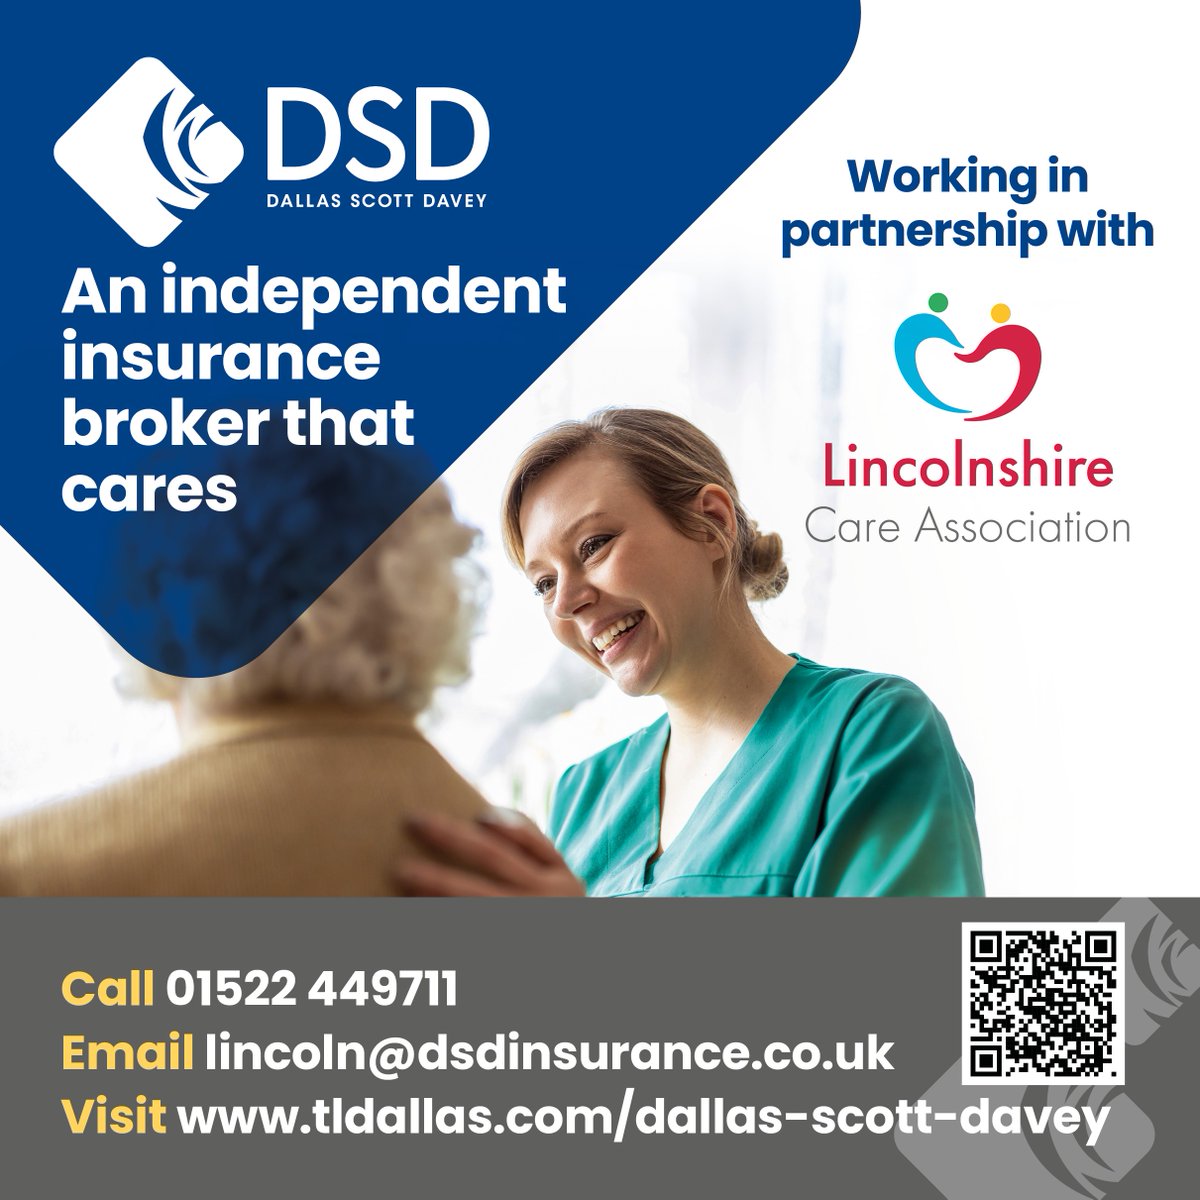 The team at @dallasscottdavey is delighted to be partnering with the  @LincolnshireCa1 providing a wide range of insurance and risk management services to its members.  
#CareHomes #DomiciliaryCare #SupportedLiving #HealthAndCare #Insurance #InsuranceBroker